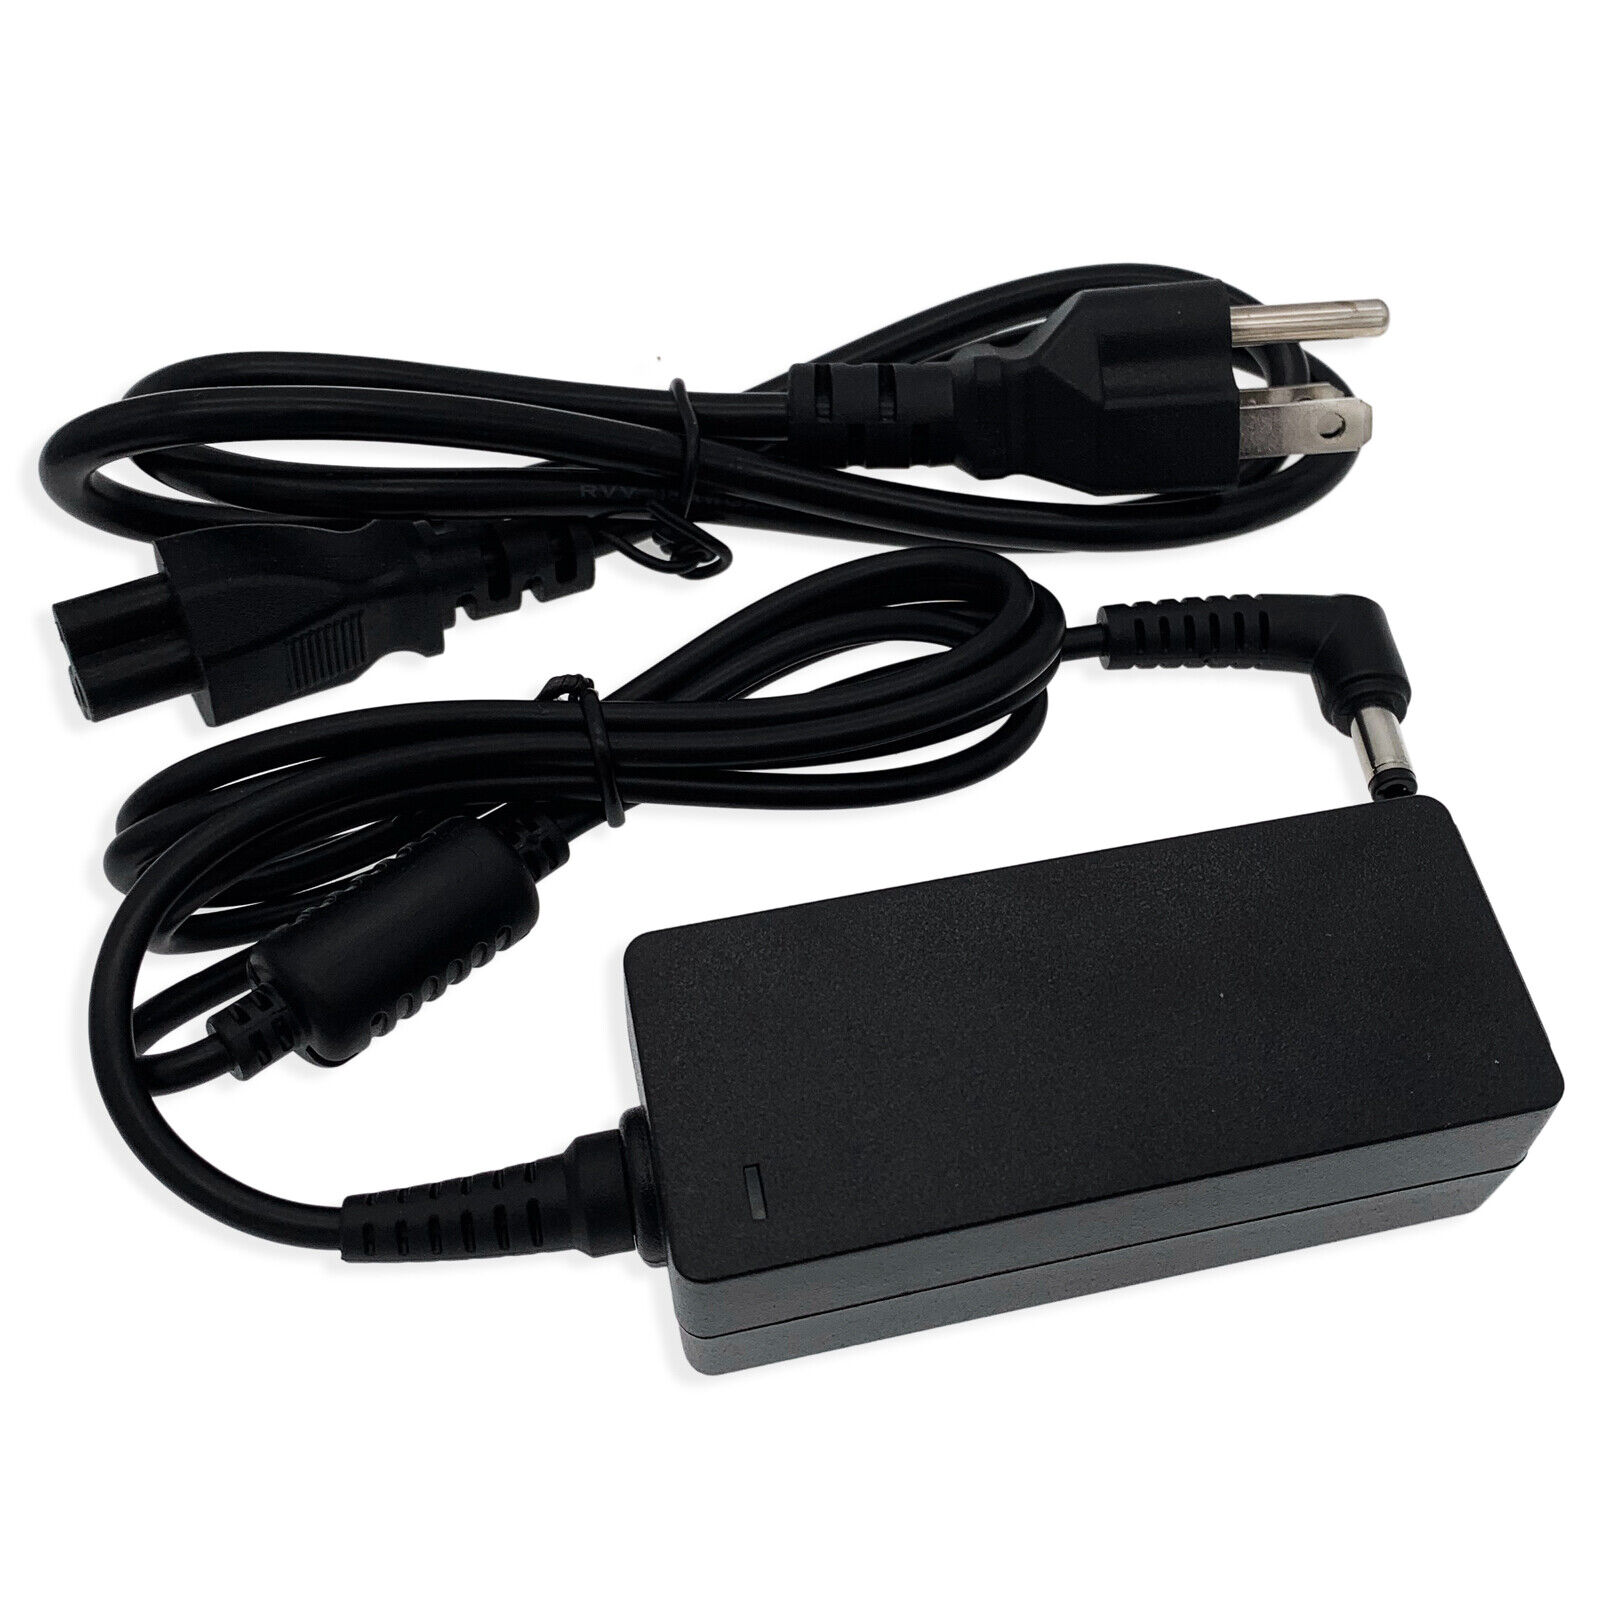 Phihong PSAC60W-480 AC Power Adapter for Westinghouse TW-63111-U042A Product Name: Phihong PSAC60W-480 Description: A